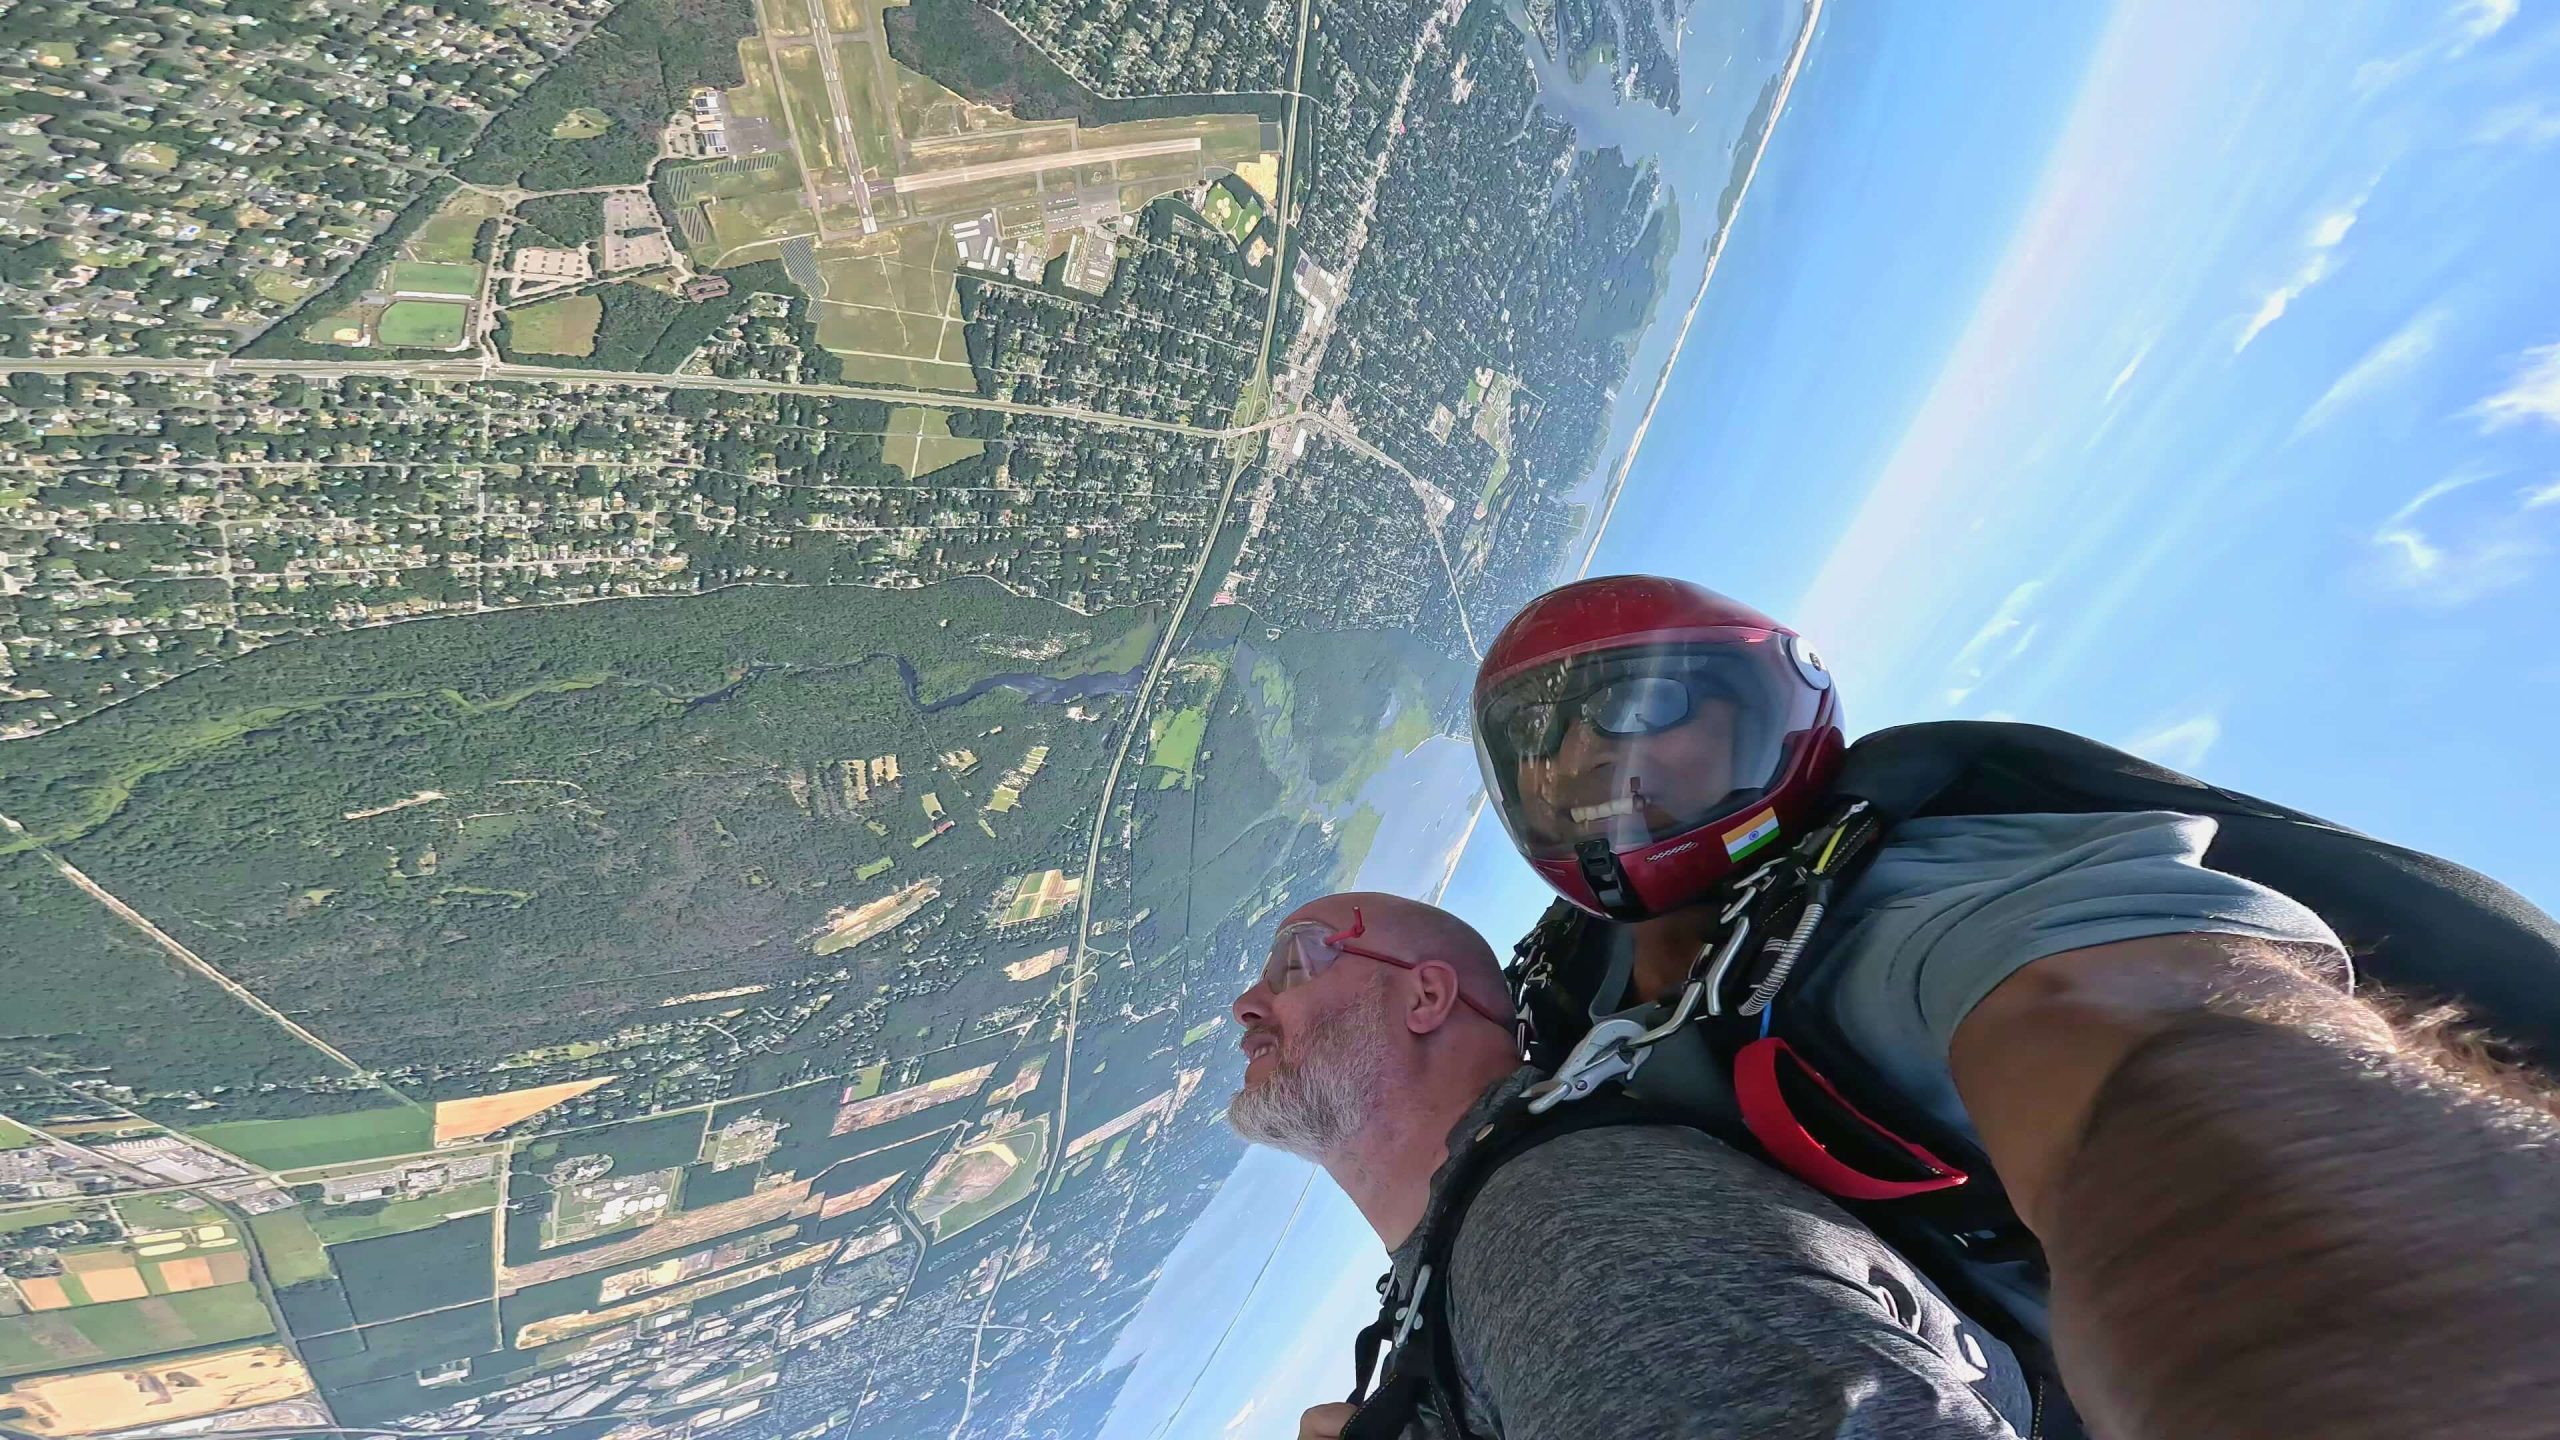 Freefall skydive by the New York coastline.